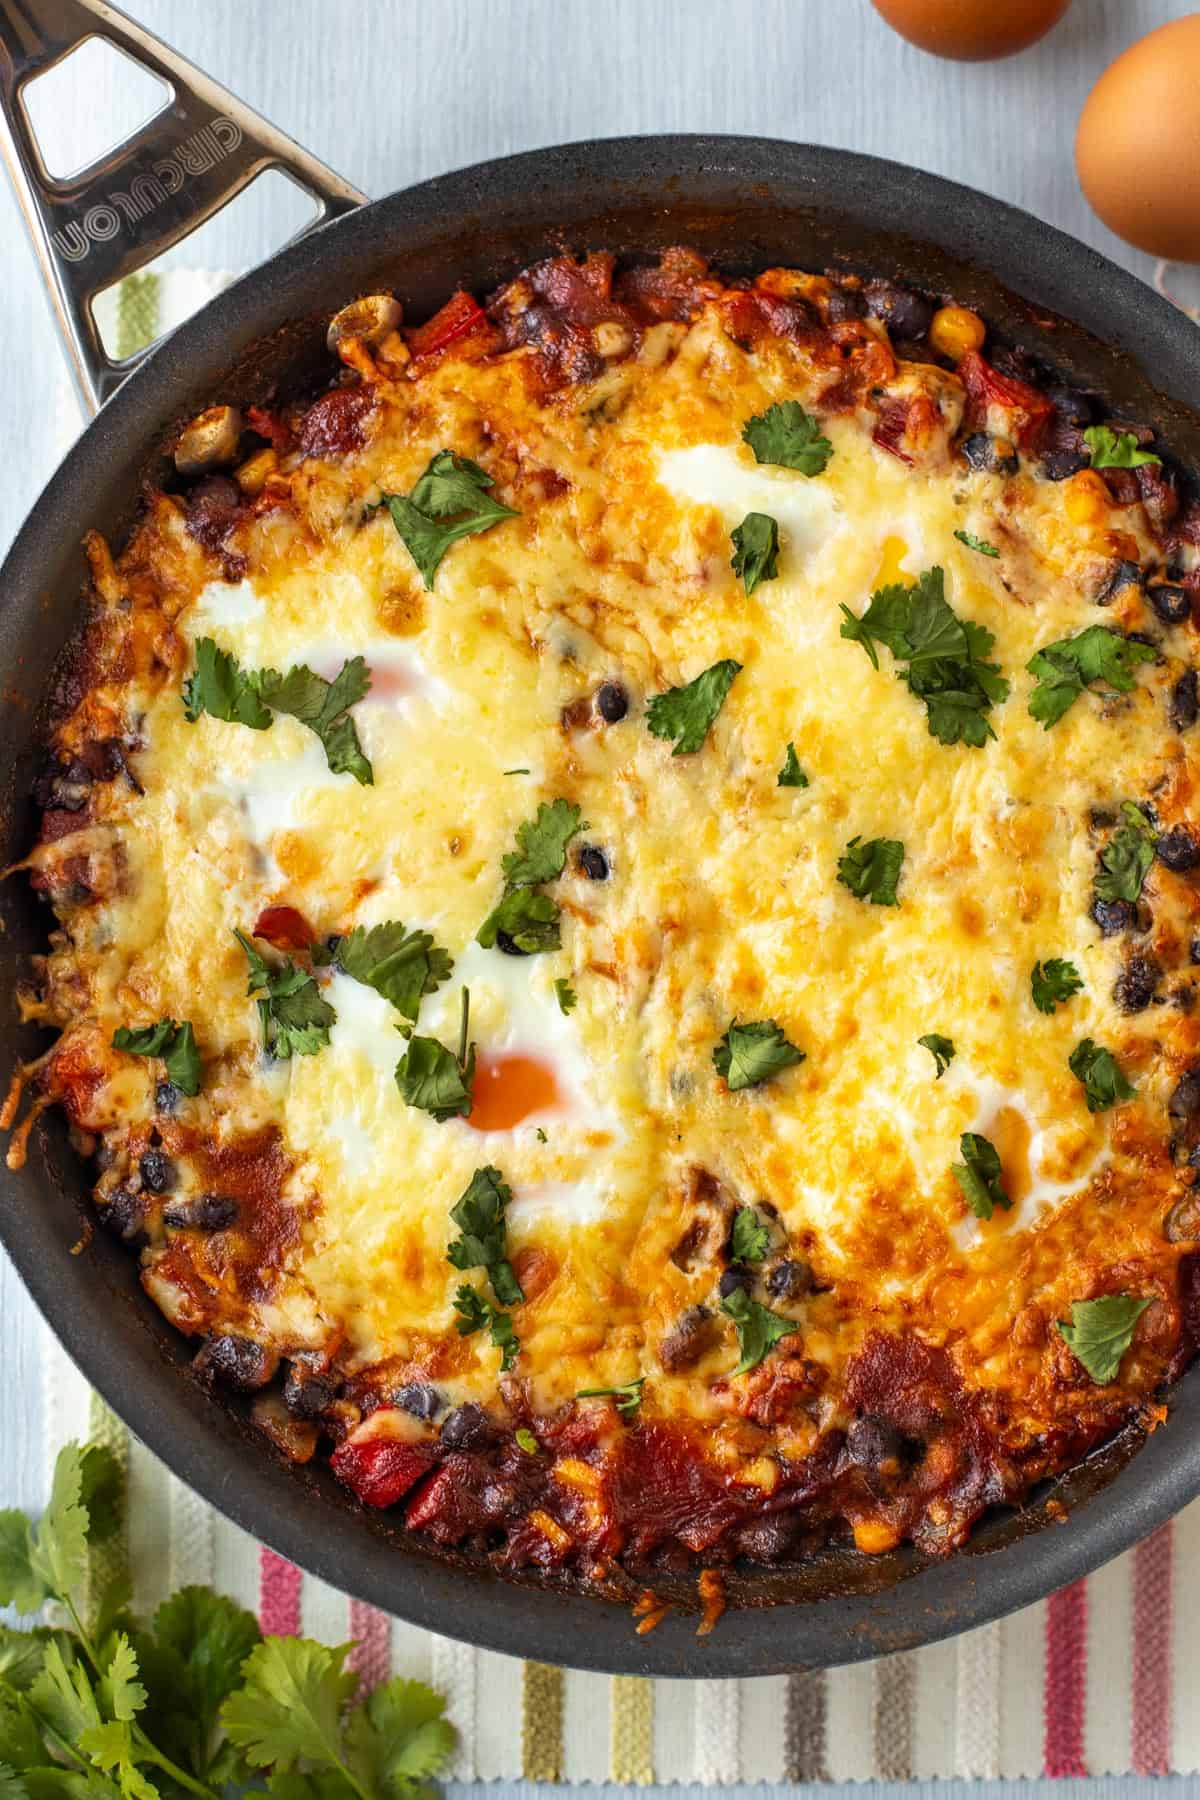 Mexican baked eggs in a frying pan, topped with melted cheese and cilantro.